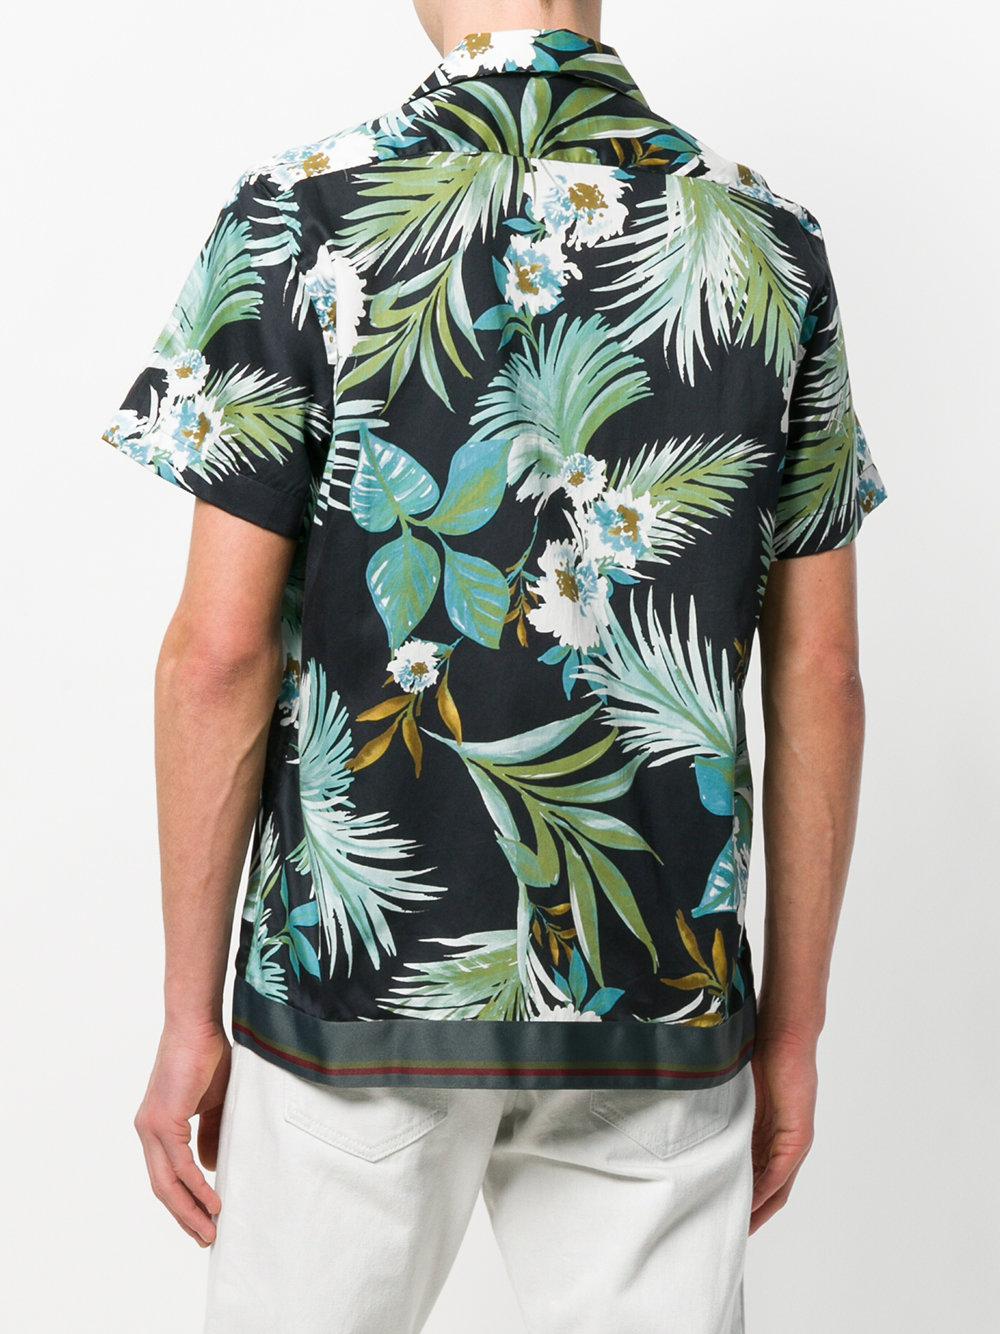 Low Brand Cotton Jungle Print Shirt in Green for Men - Lyst